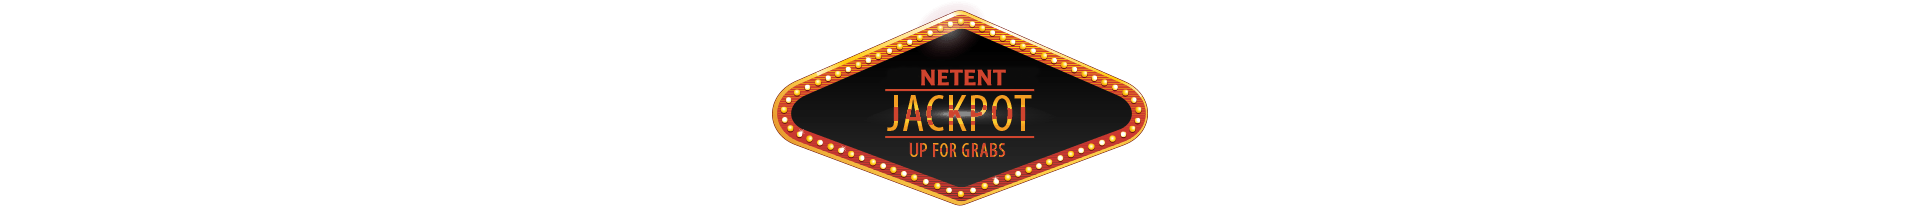 Jackpot in the Netent slots.